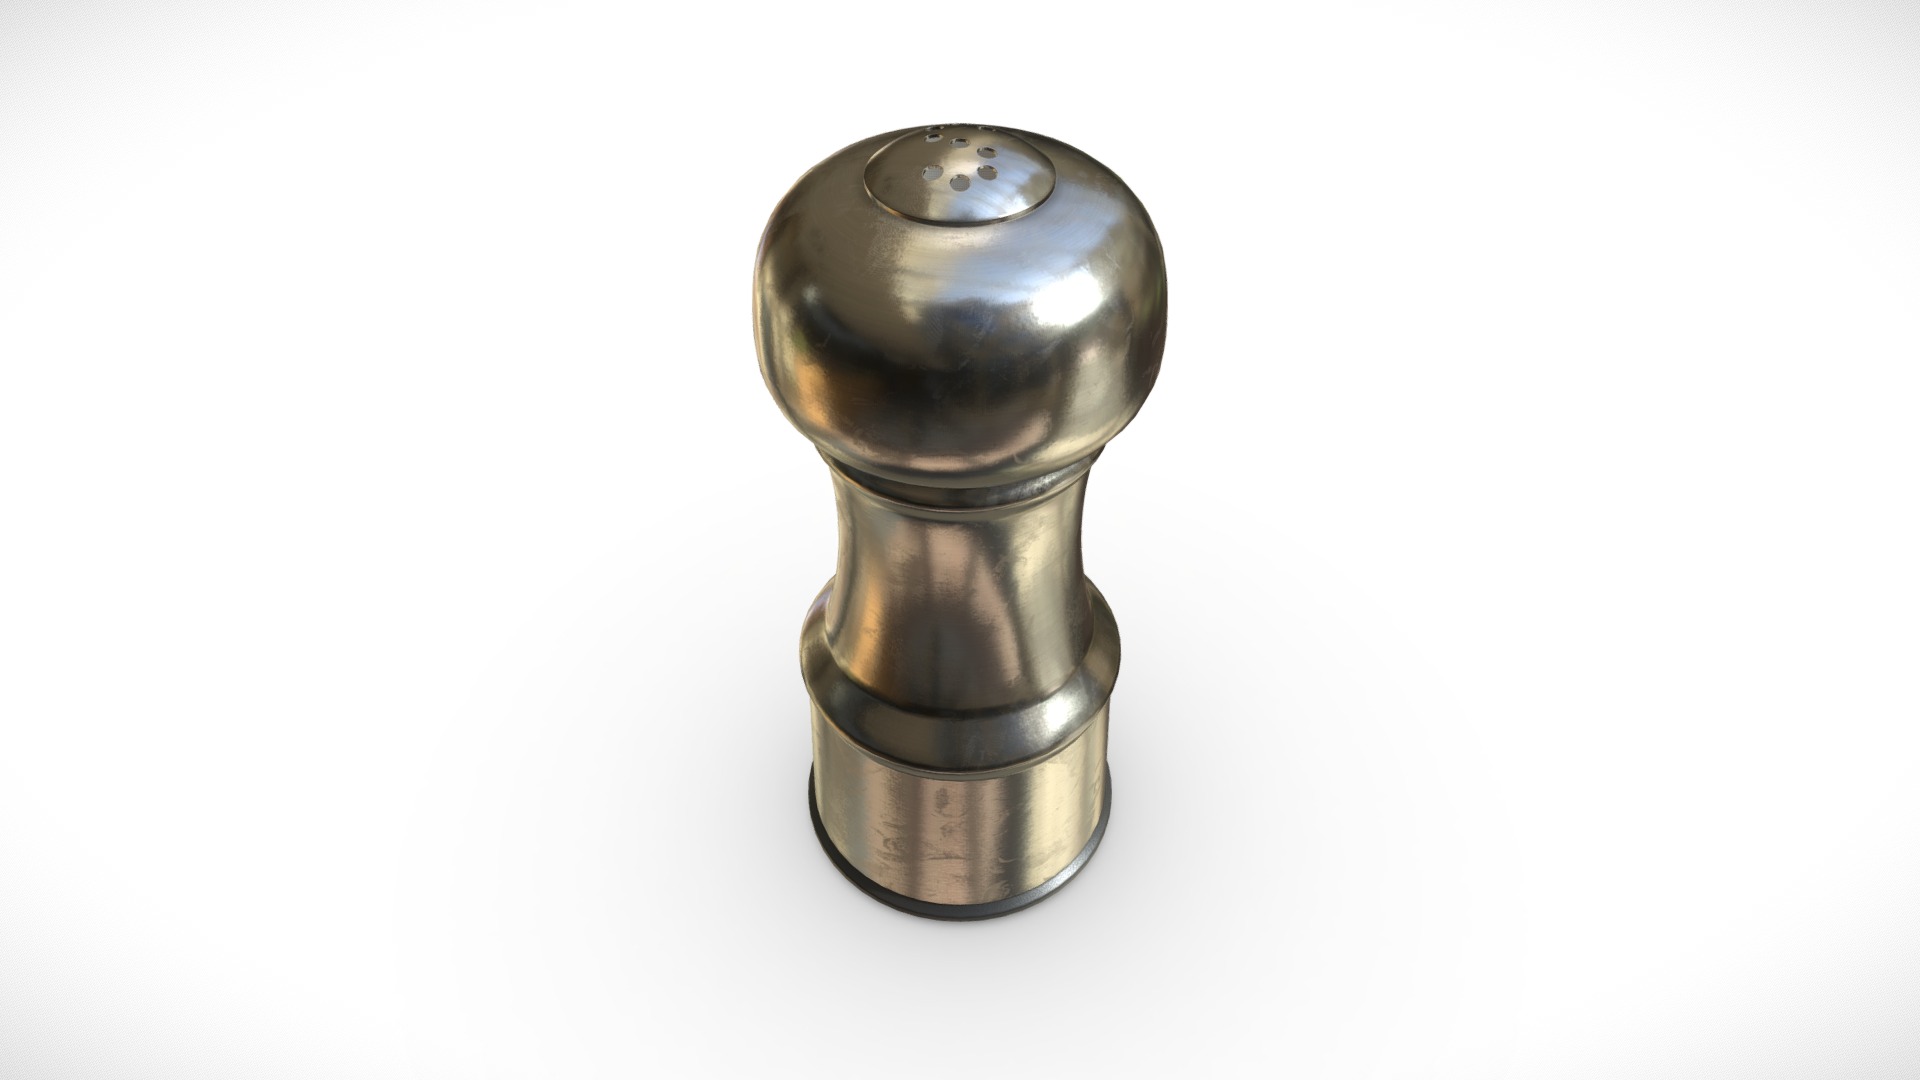 3D model Salt Shaker - This is a 3D model of the Salt Shaker. The 3D model is about a silver and black metal object.